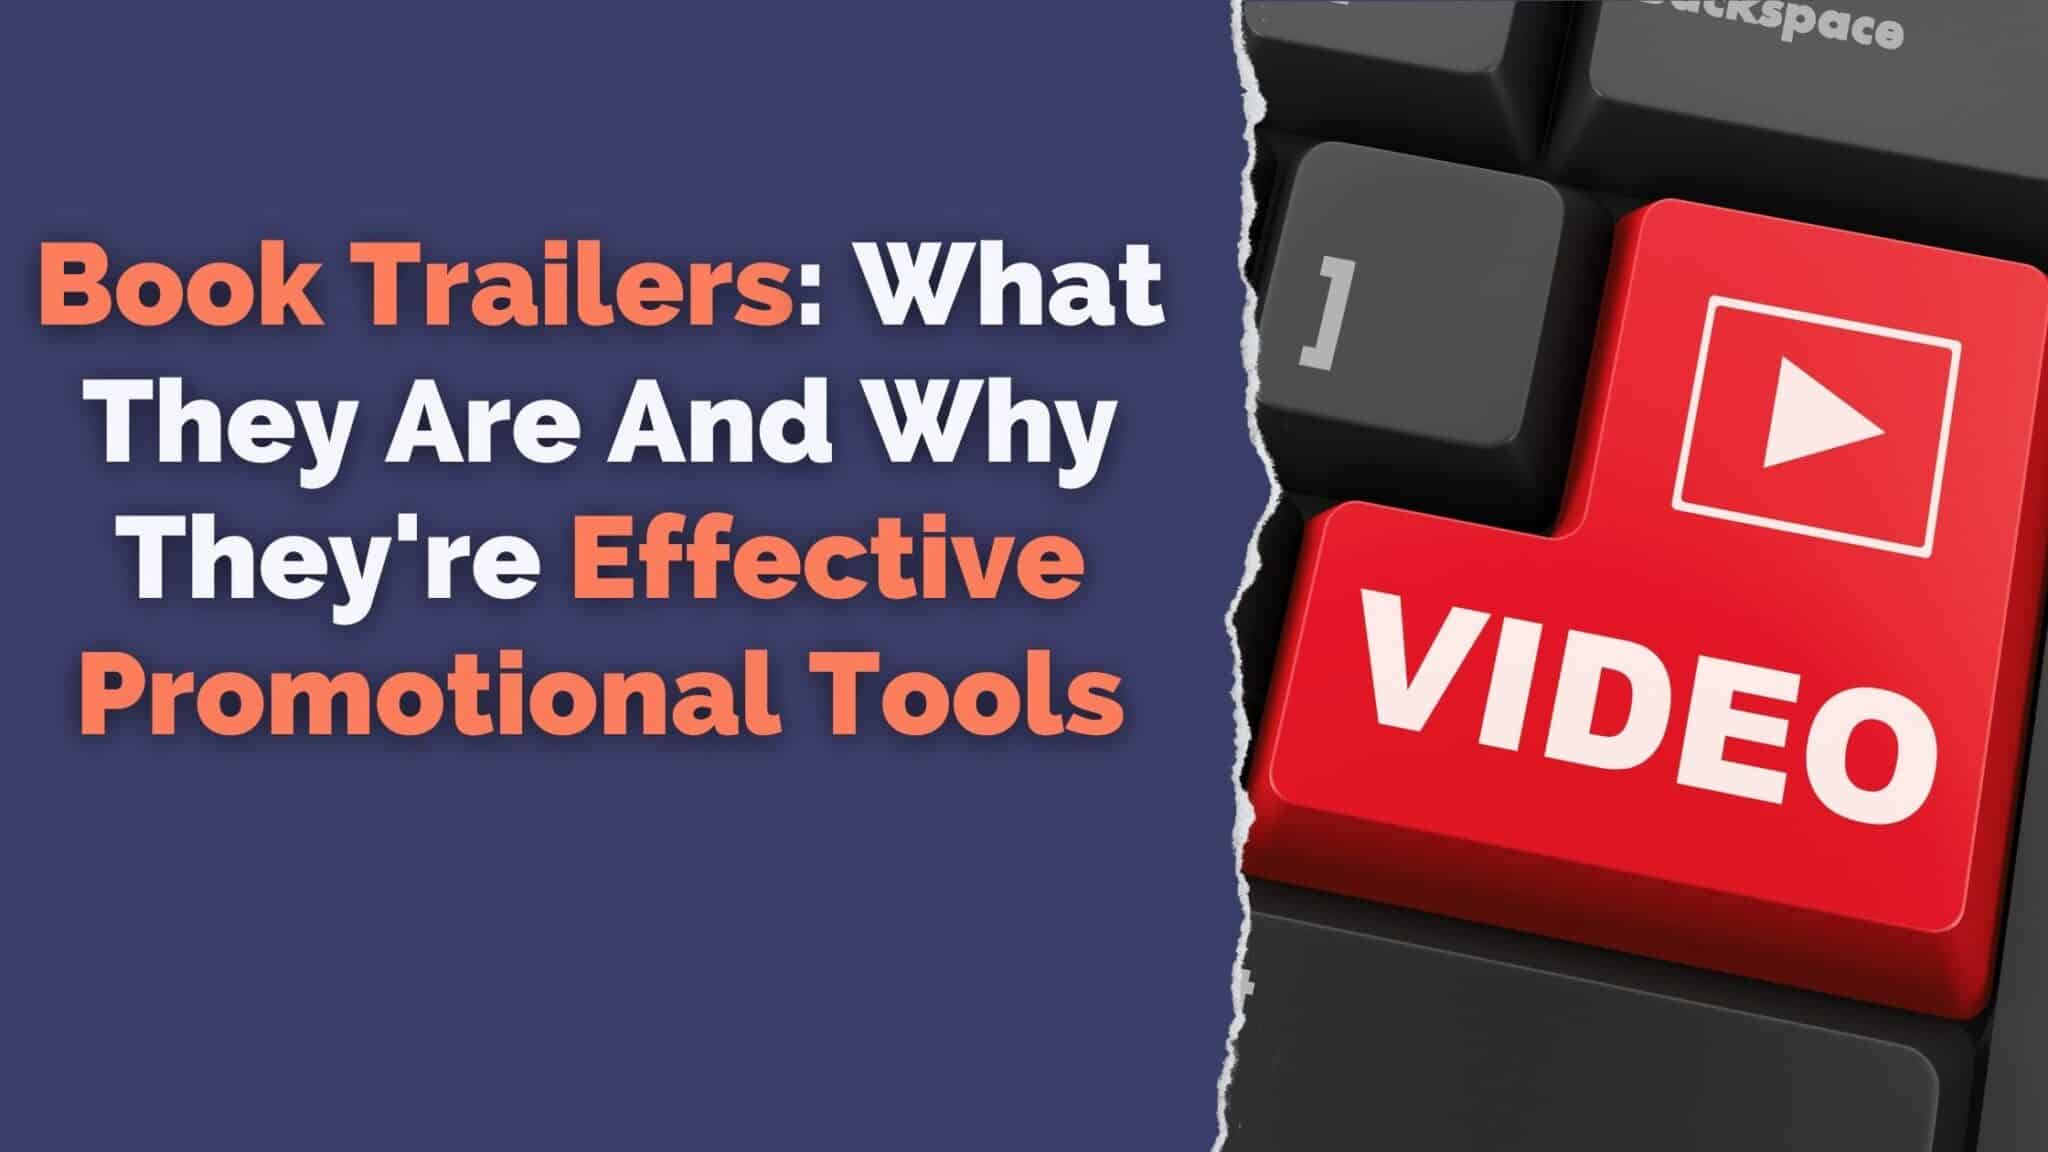 Book Trailers: What They Are And Why They’re Effective Promotional Tools